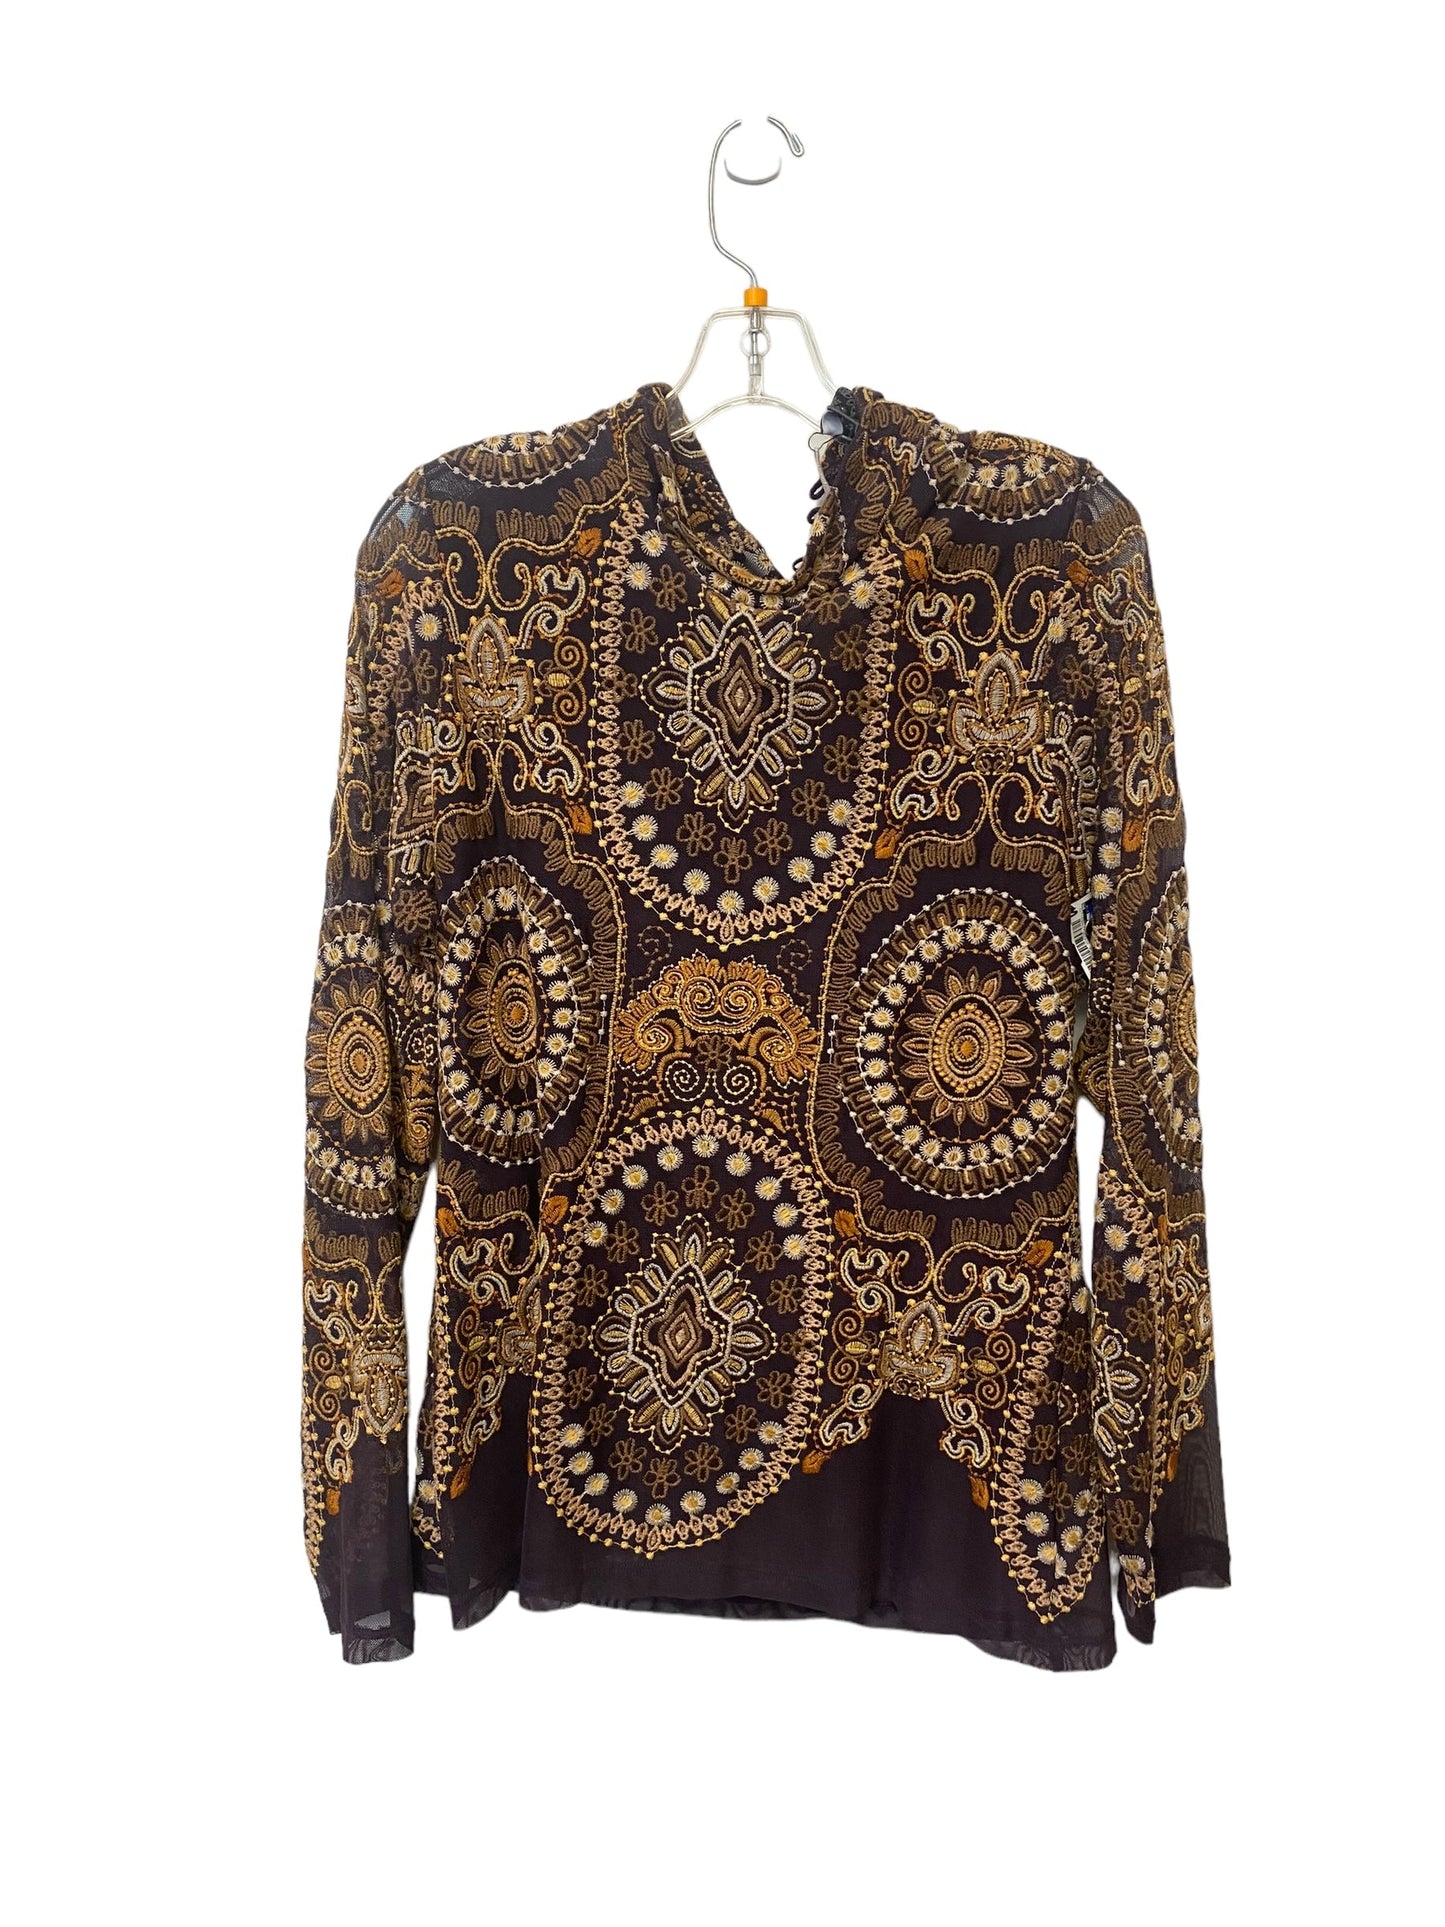 Top Long Sleeve By Johnny Was  Size: L